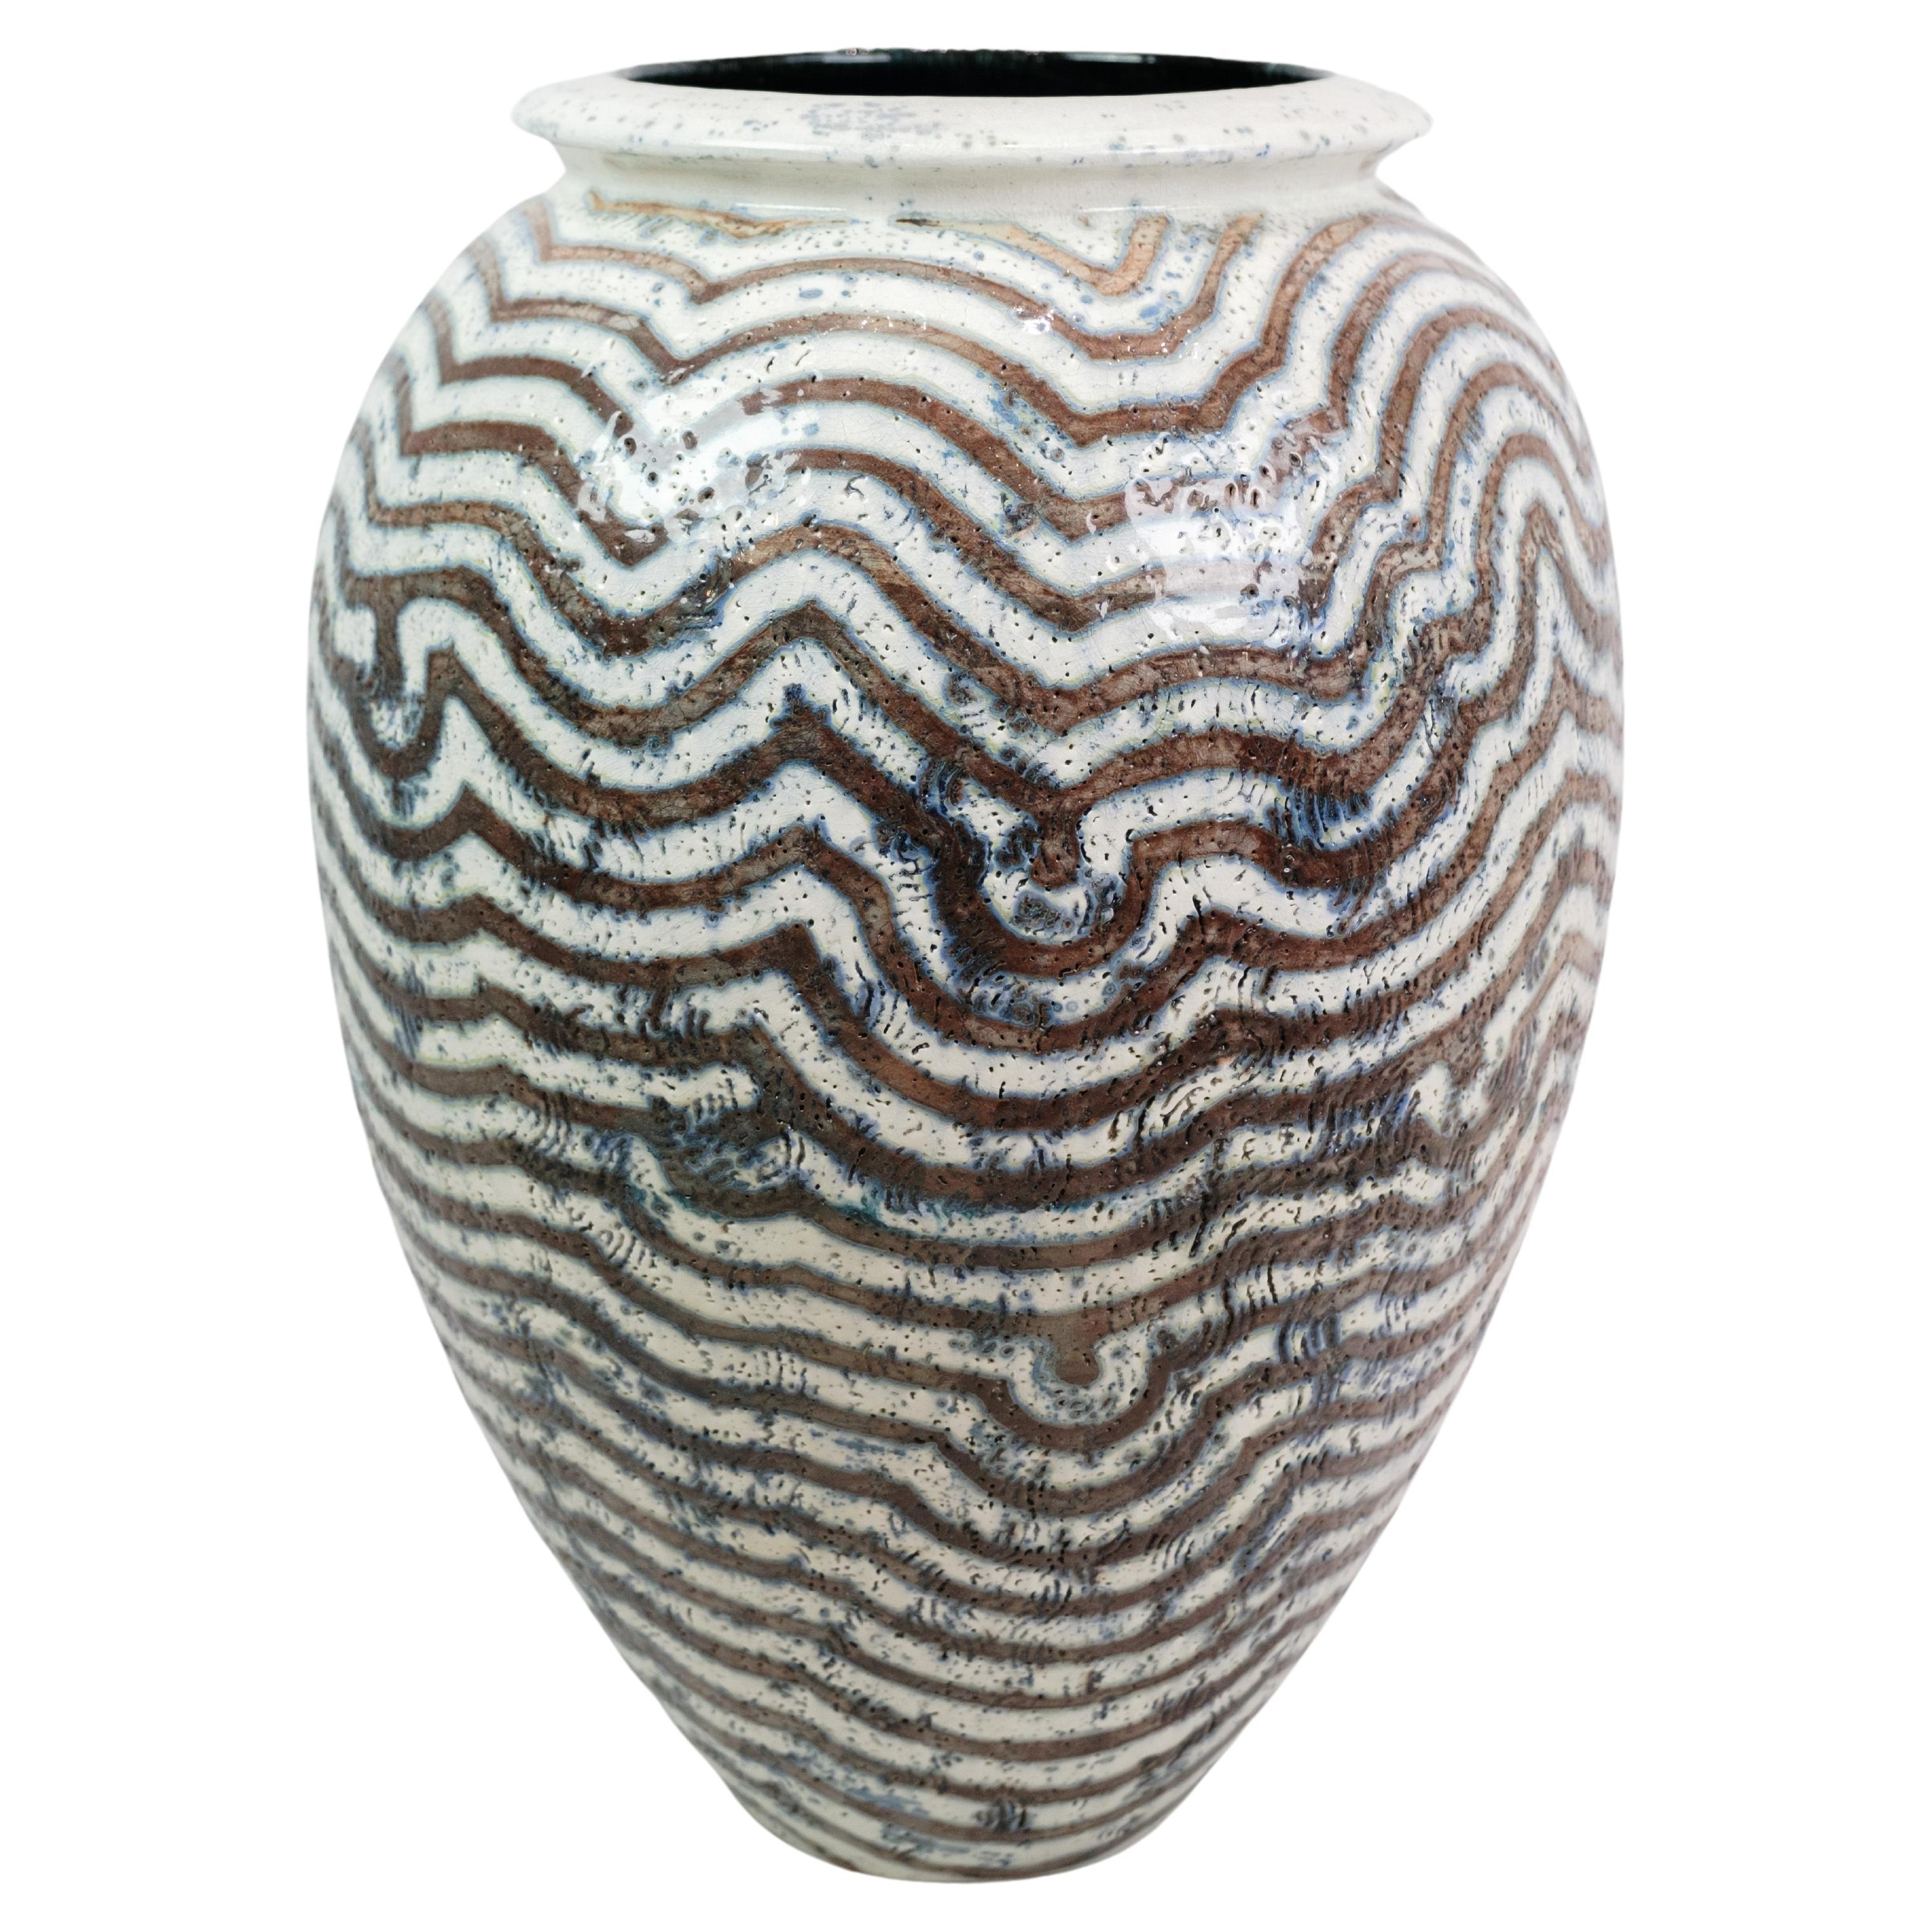 Stoneware Floor Vase In Blue, Grey and White Designed By Per Weiss From 1980s For Sale